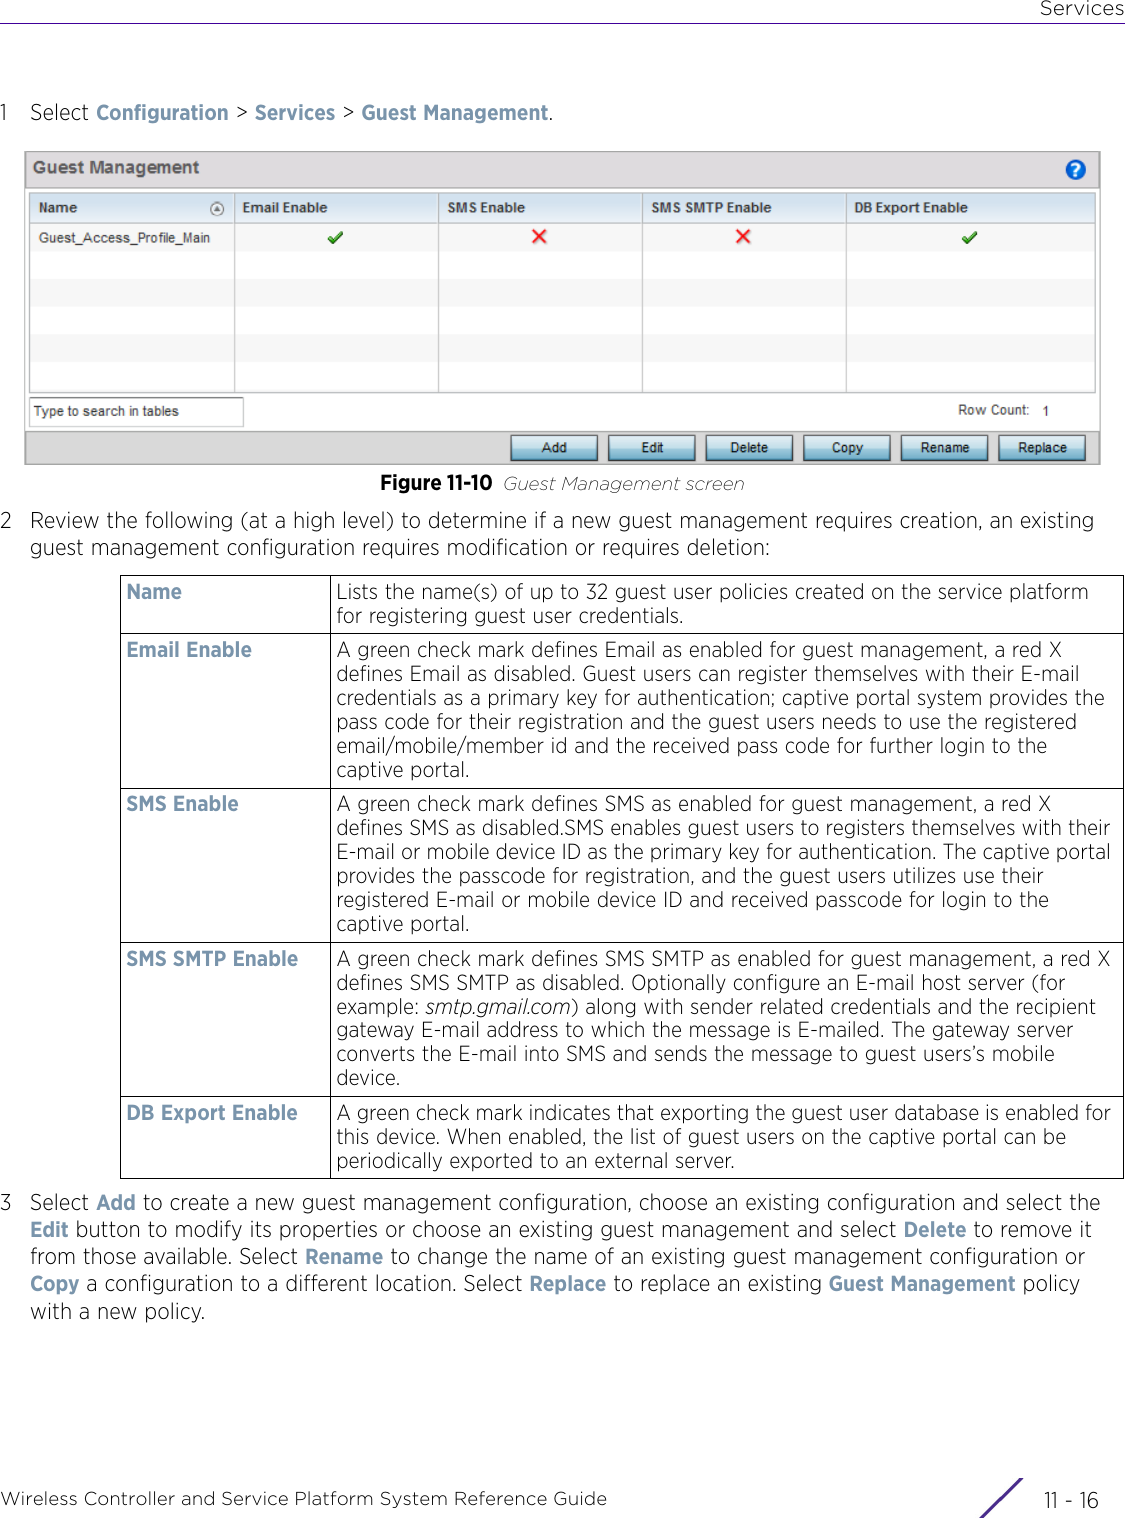 ServicesWireless Controller and Service Platform System Reference Guide  11 - 161Select Configuration &gt; Services &gt; Guest Management.Figure 11-10 Guest Management screen2 Review the following (at a high level) to determine if a new guest management requires creation, an existing guest management configuration requires modification or requires deletion:3Select Add to create a new guest management configuration, choose an existing configuration and select the Edit button to modify its properties or choose an existing guest management and select Delete to remove it from those available. Select Rename to change the name of an existing guest management configuration or Copy a configuration to a different location. Select Replace to replace an existing Guest Management policy with a new policy.Name Lists the name(s) of up to 32 guest user policies created on the service platform for registering guest user credentials.Email Enable A green check mark defines Email as enabled for guest management, a red X defines Email as disabled. Guest users can register themselves with their E-mail credentials as a primary key for authentication; captive portal system provides the pass code for their registration and the guest users needs to use the registered email/mobile/member id and the received pass code for further login to the captive portal.SMS Enable A green check mark defines SMS as enabled for guest management, a red X defines SMS as disabled.SMS enables guest users to registers themselves with their E-mail or mobile device ID as the primary key for authentication. The captive portal provides the passcode for registration, and the guest users utilizes use their registered E-mail or mobile device ID and received passcode for login to the captive portal.SMS SMTP Enable A green check mark defines SMS SMTP as enabled for guest management, a red X defines SMS SMTP as disabled. Optionally configure an E-mail host server (for example: smtp.gmail.com) along with sender related credentials and the recipient gateway E-mail address to which the message is E-mailed. The gateway server converts the E-mail into SMS and sends the message to guest users’s mobile device.DB Export Enable A green check mark indicates that exporting the guest user database is enabled for this device. When enabled, the list of guest users on the captive portal can be periodically exported to an external server.